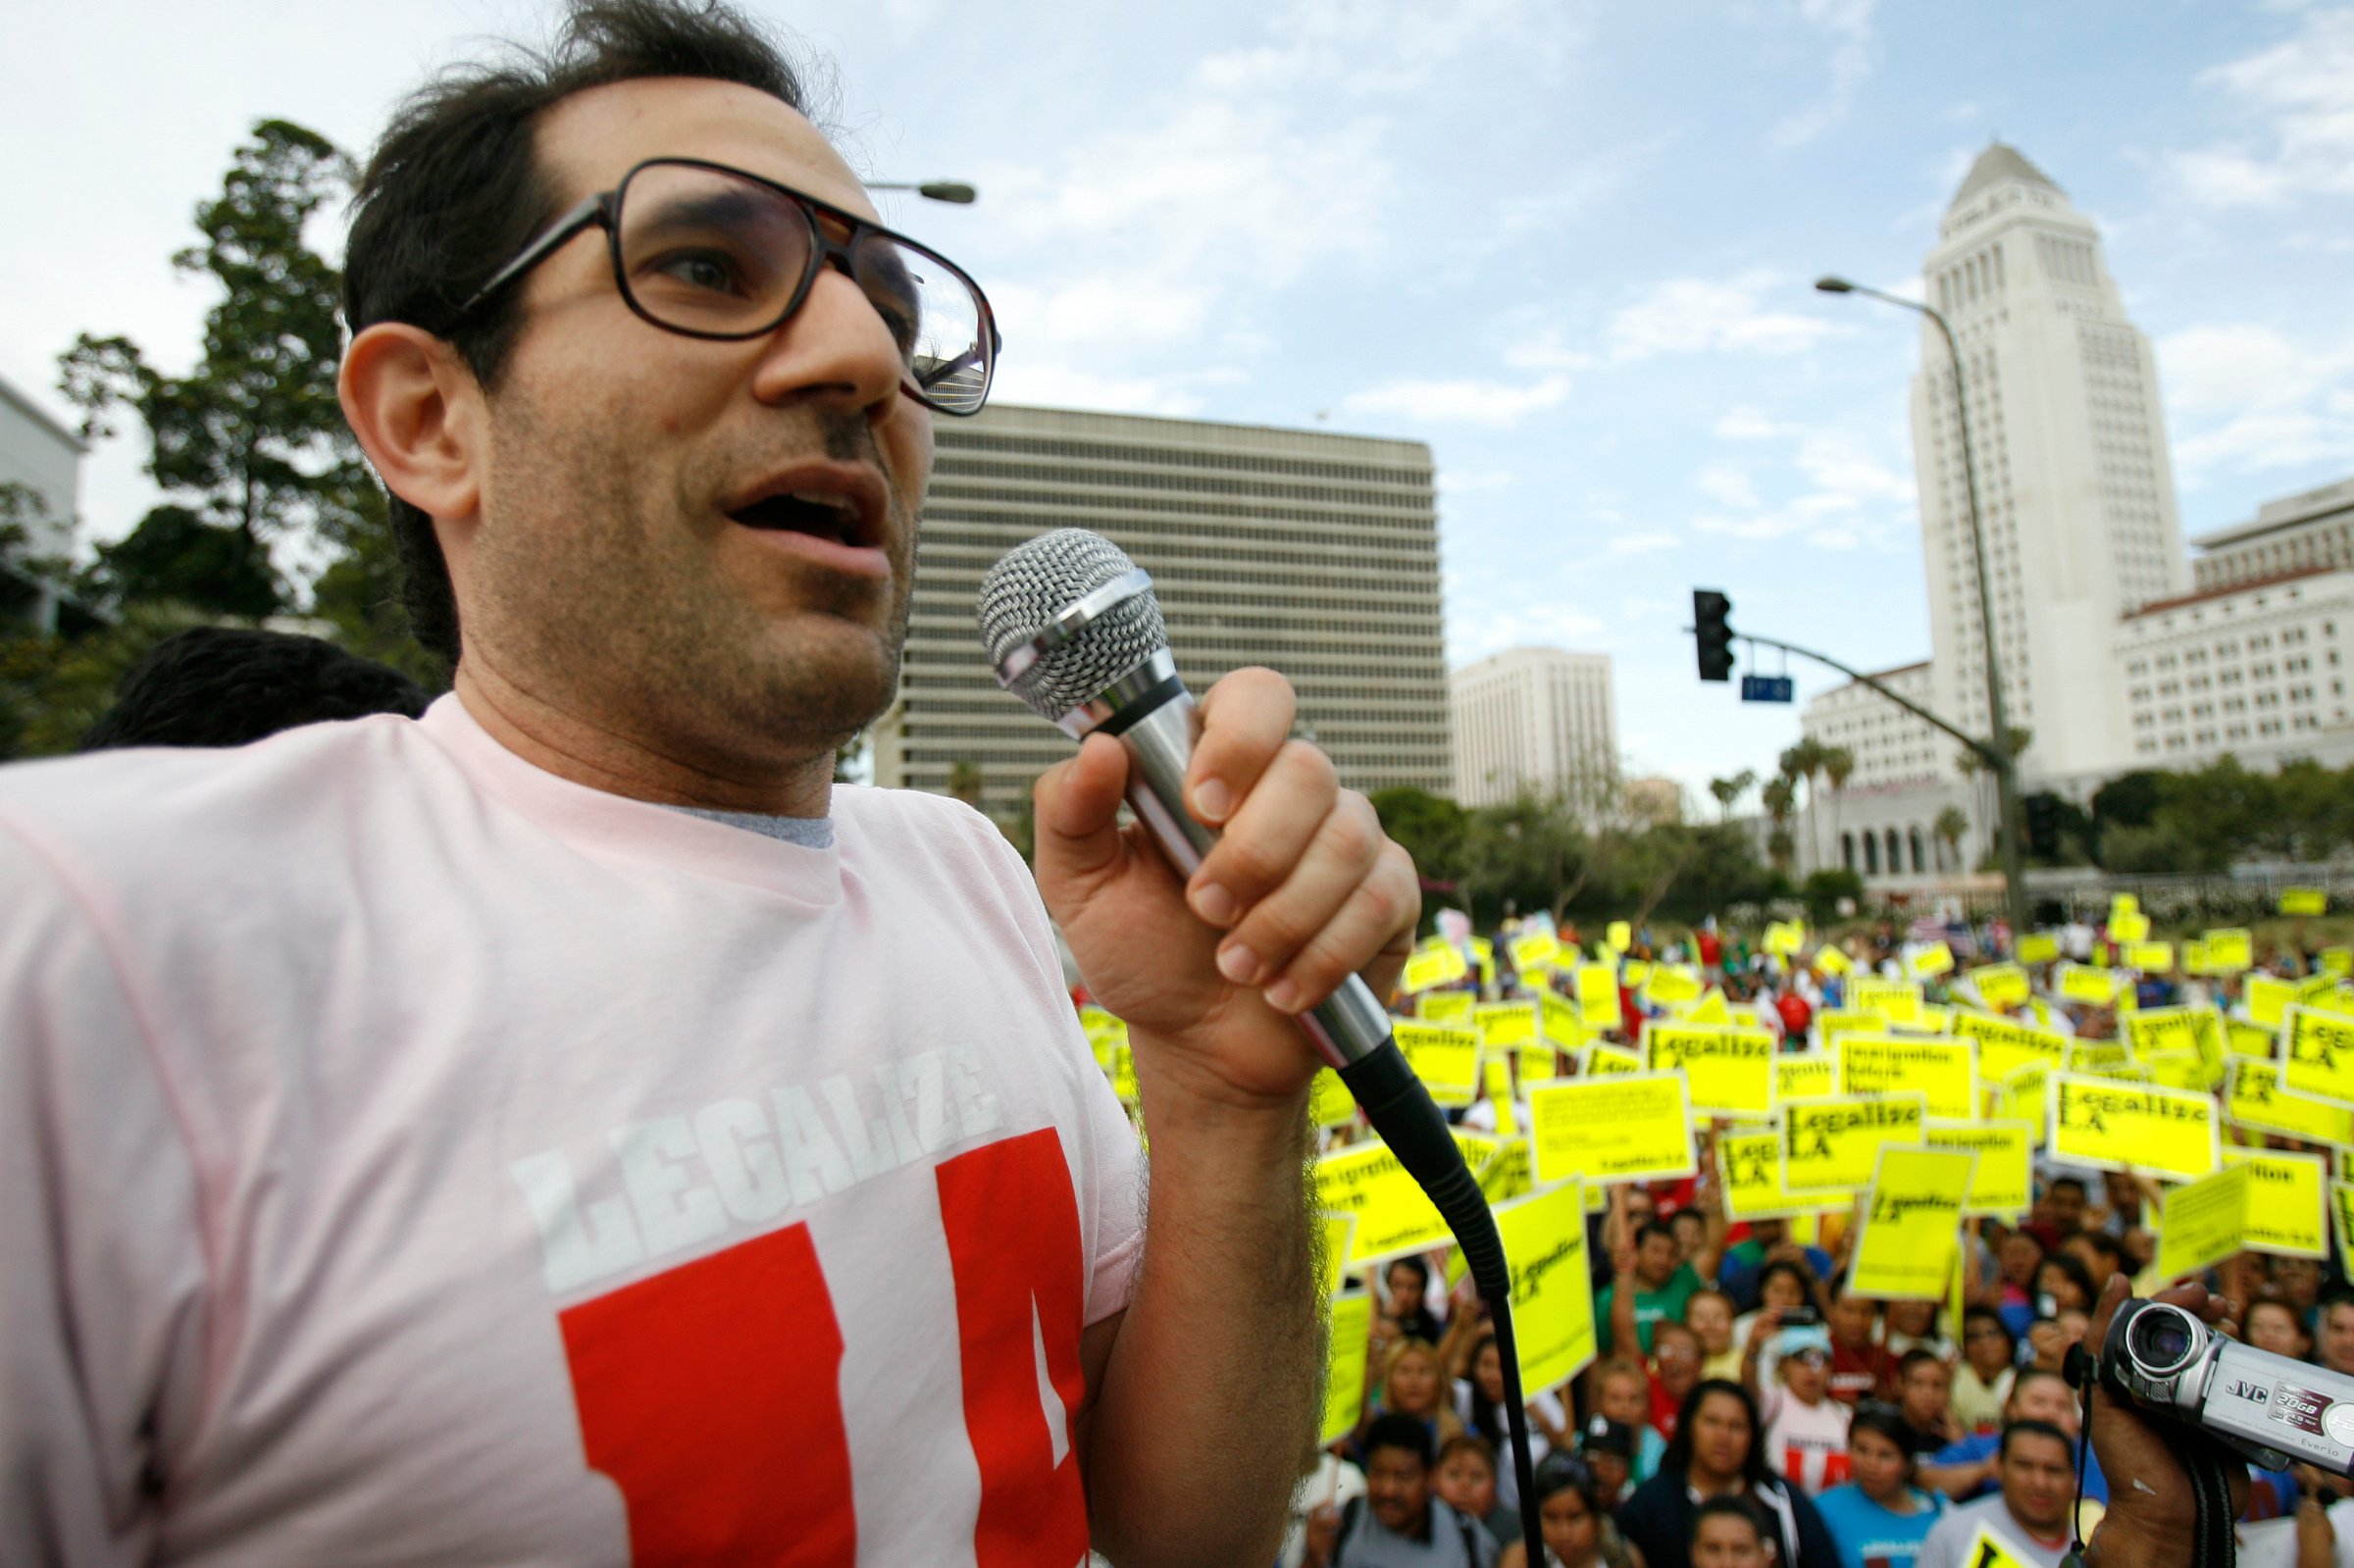 American Apparel owner Dov Charney speaks during a May Day rally protest march for immigrant rights, in downtown Los Angeles